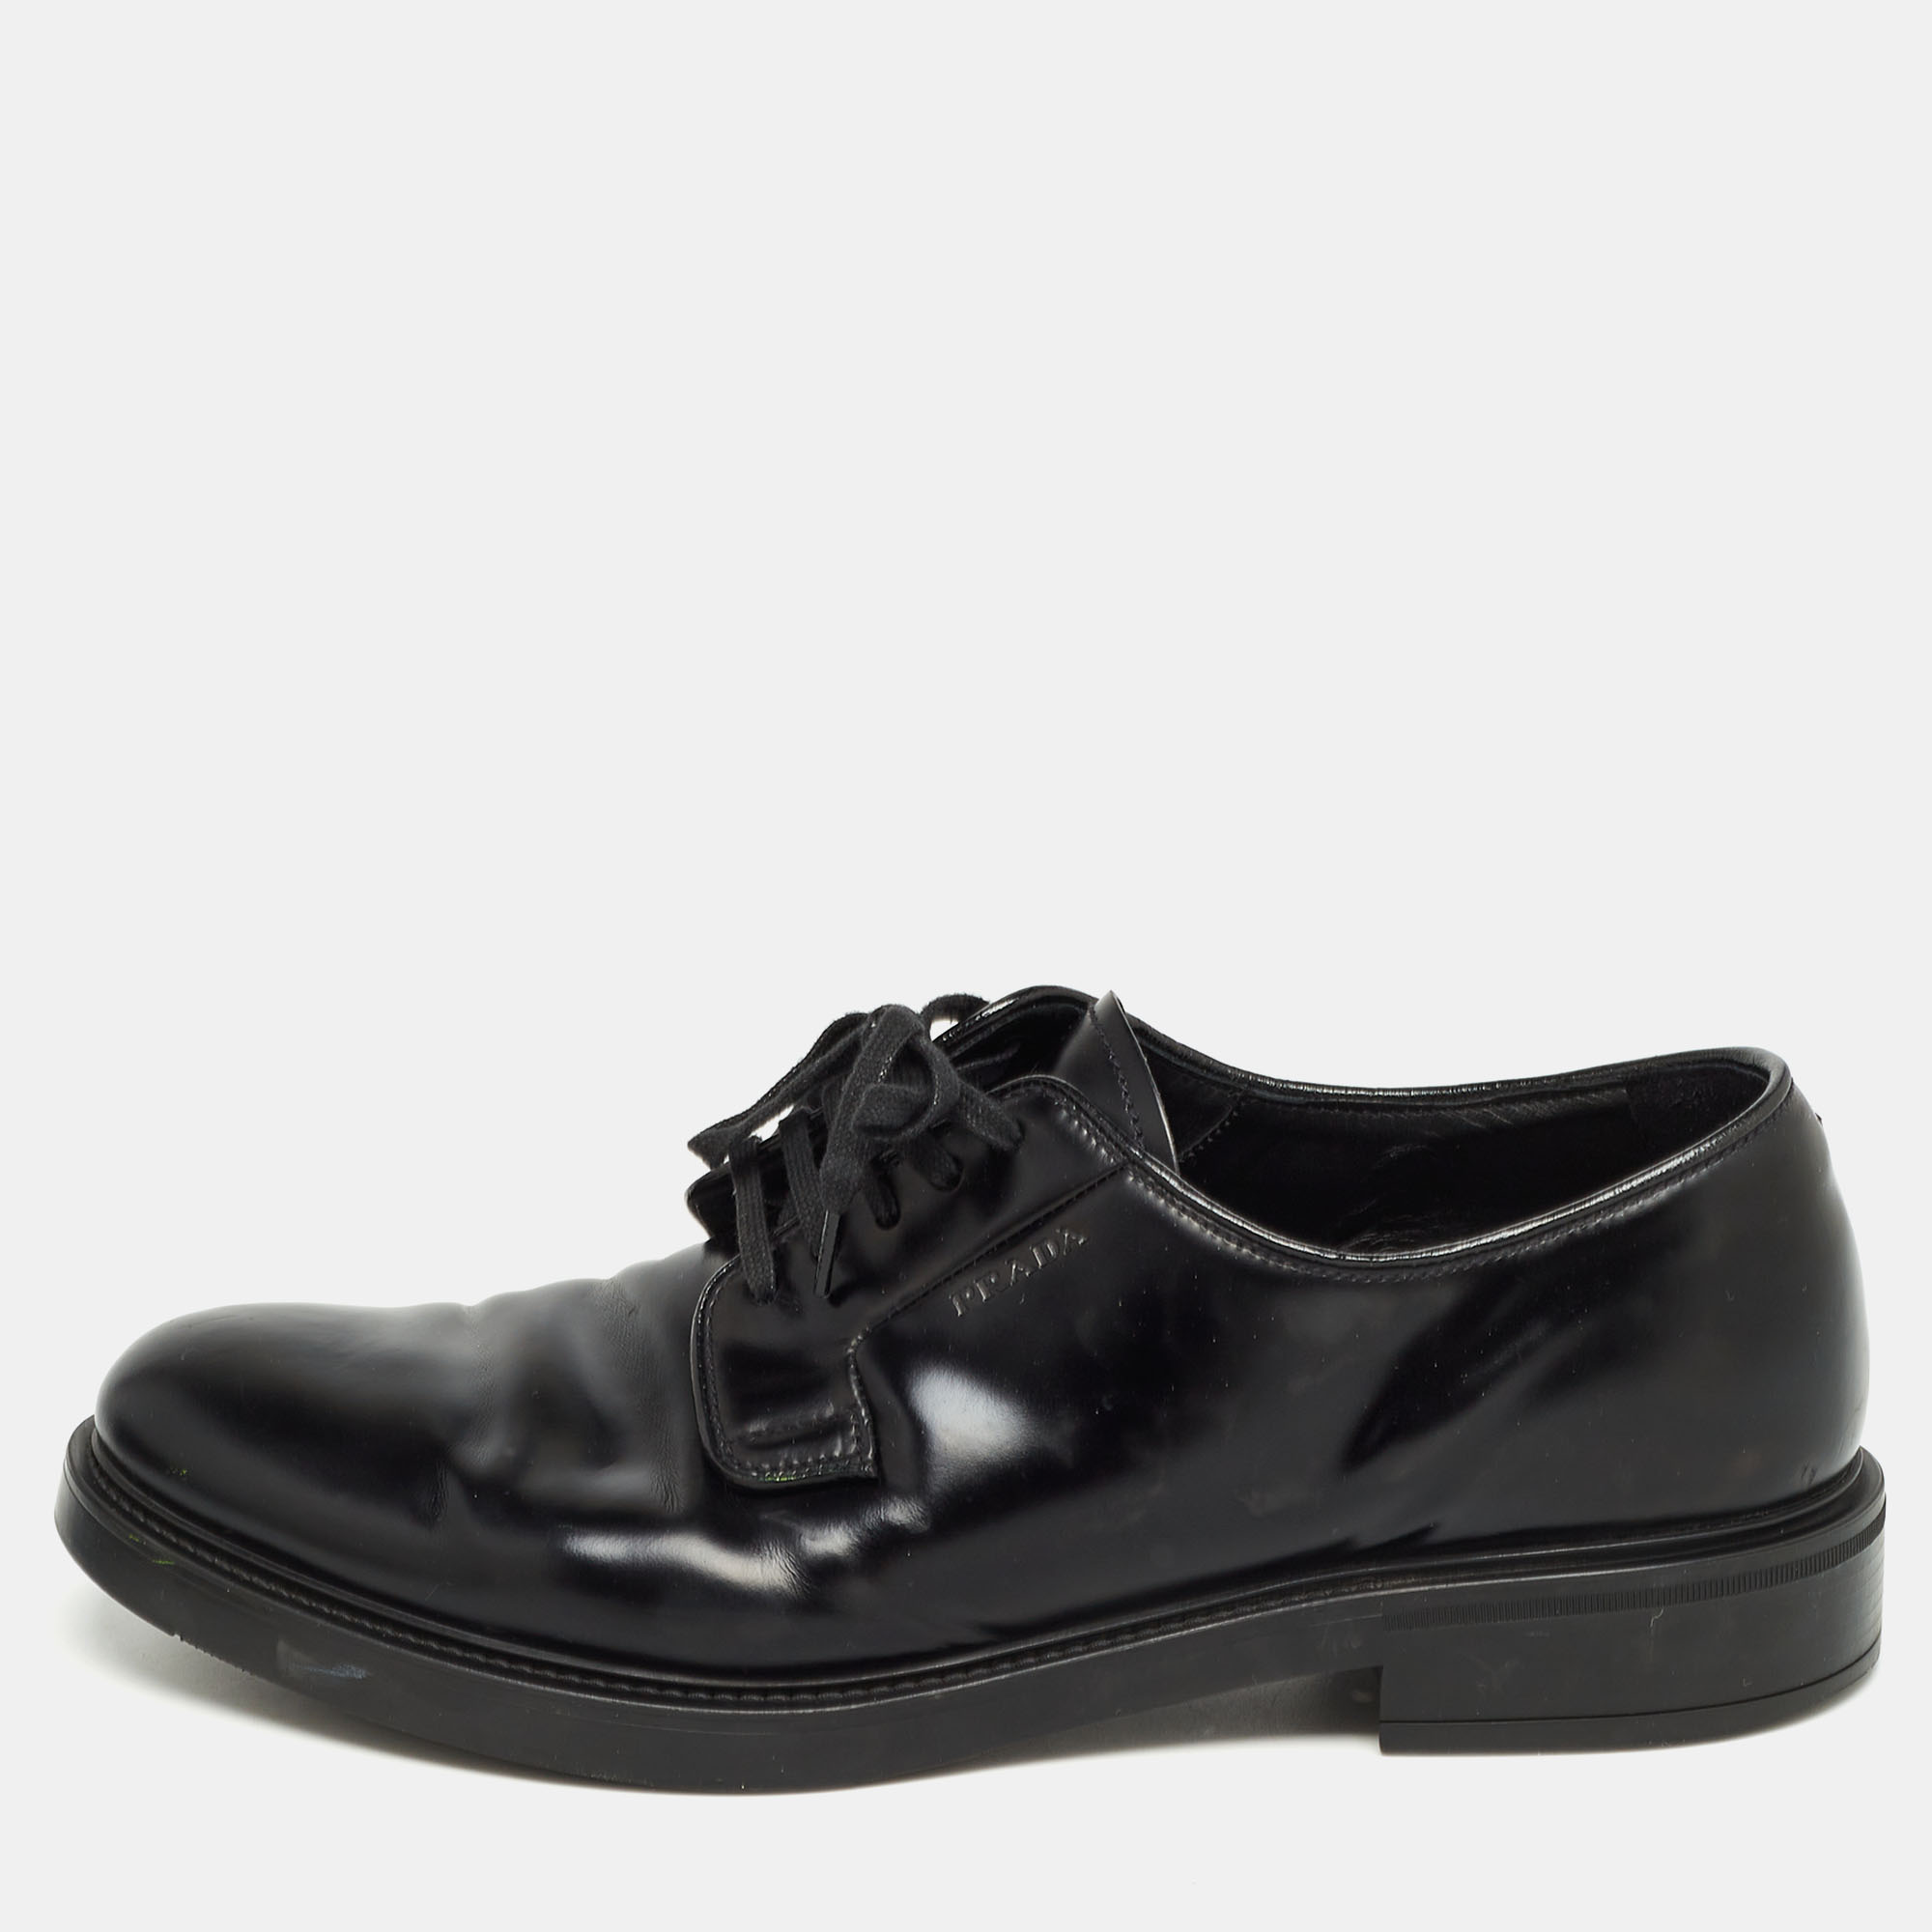 Pre-owned Prada Black Leather Lace Up Derby Size 41